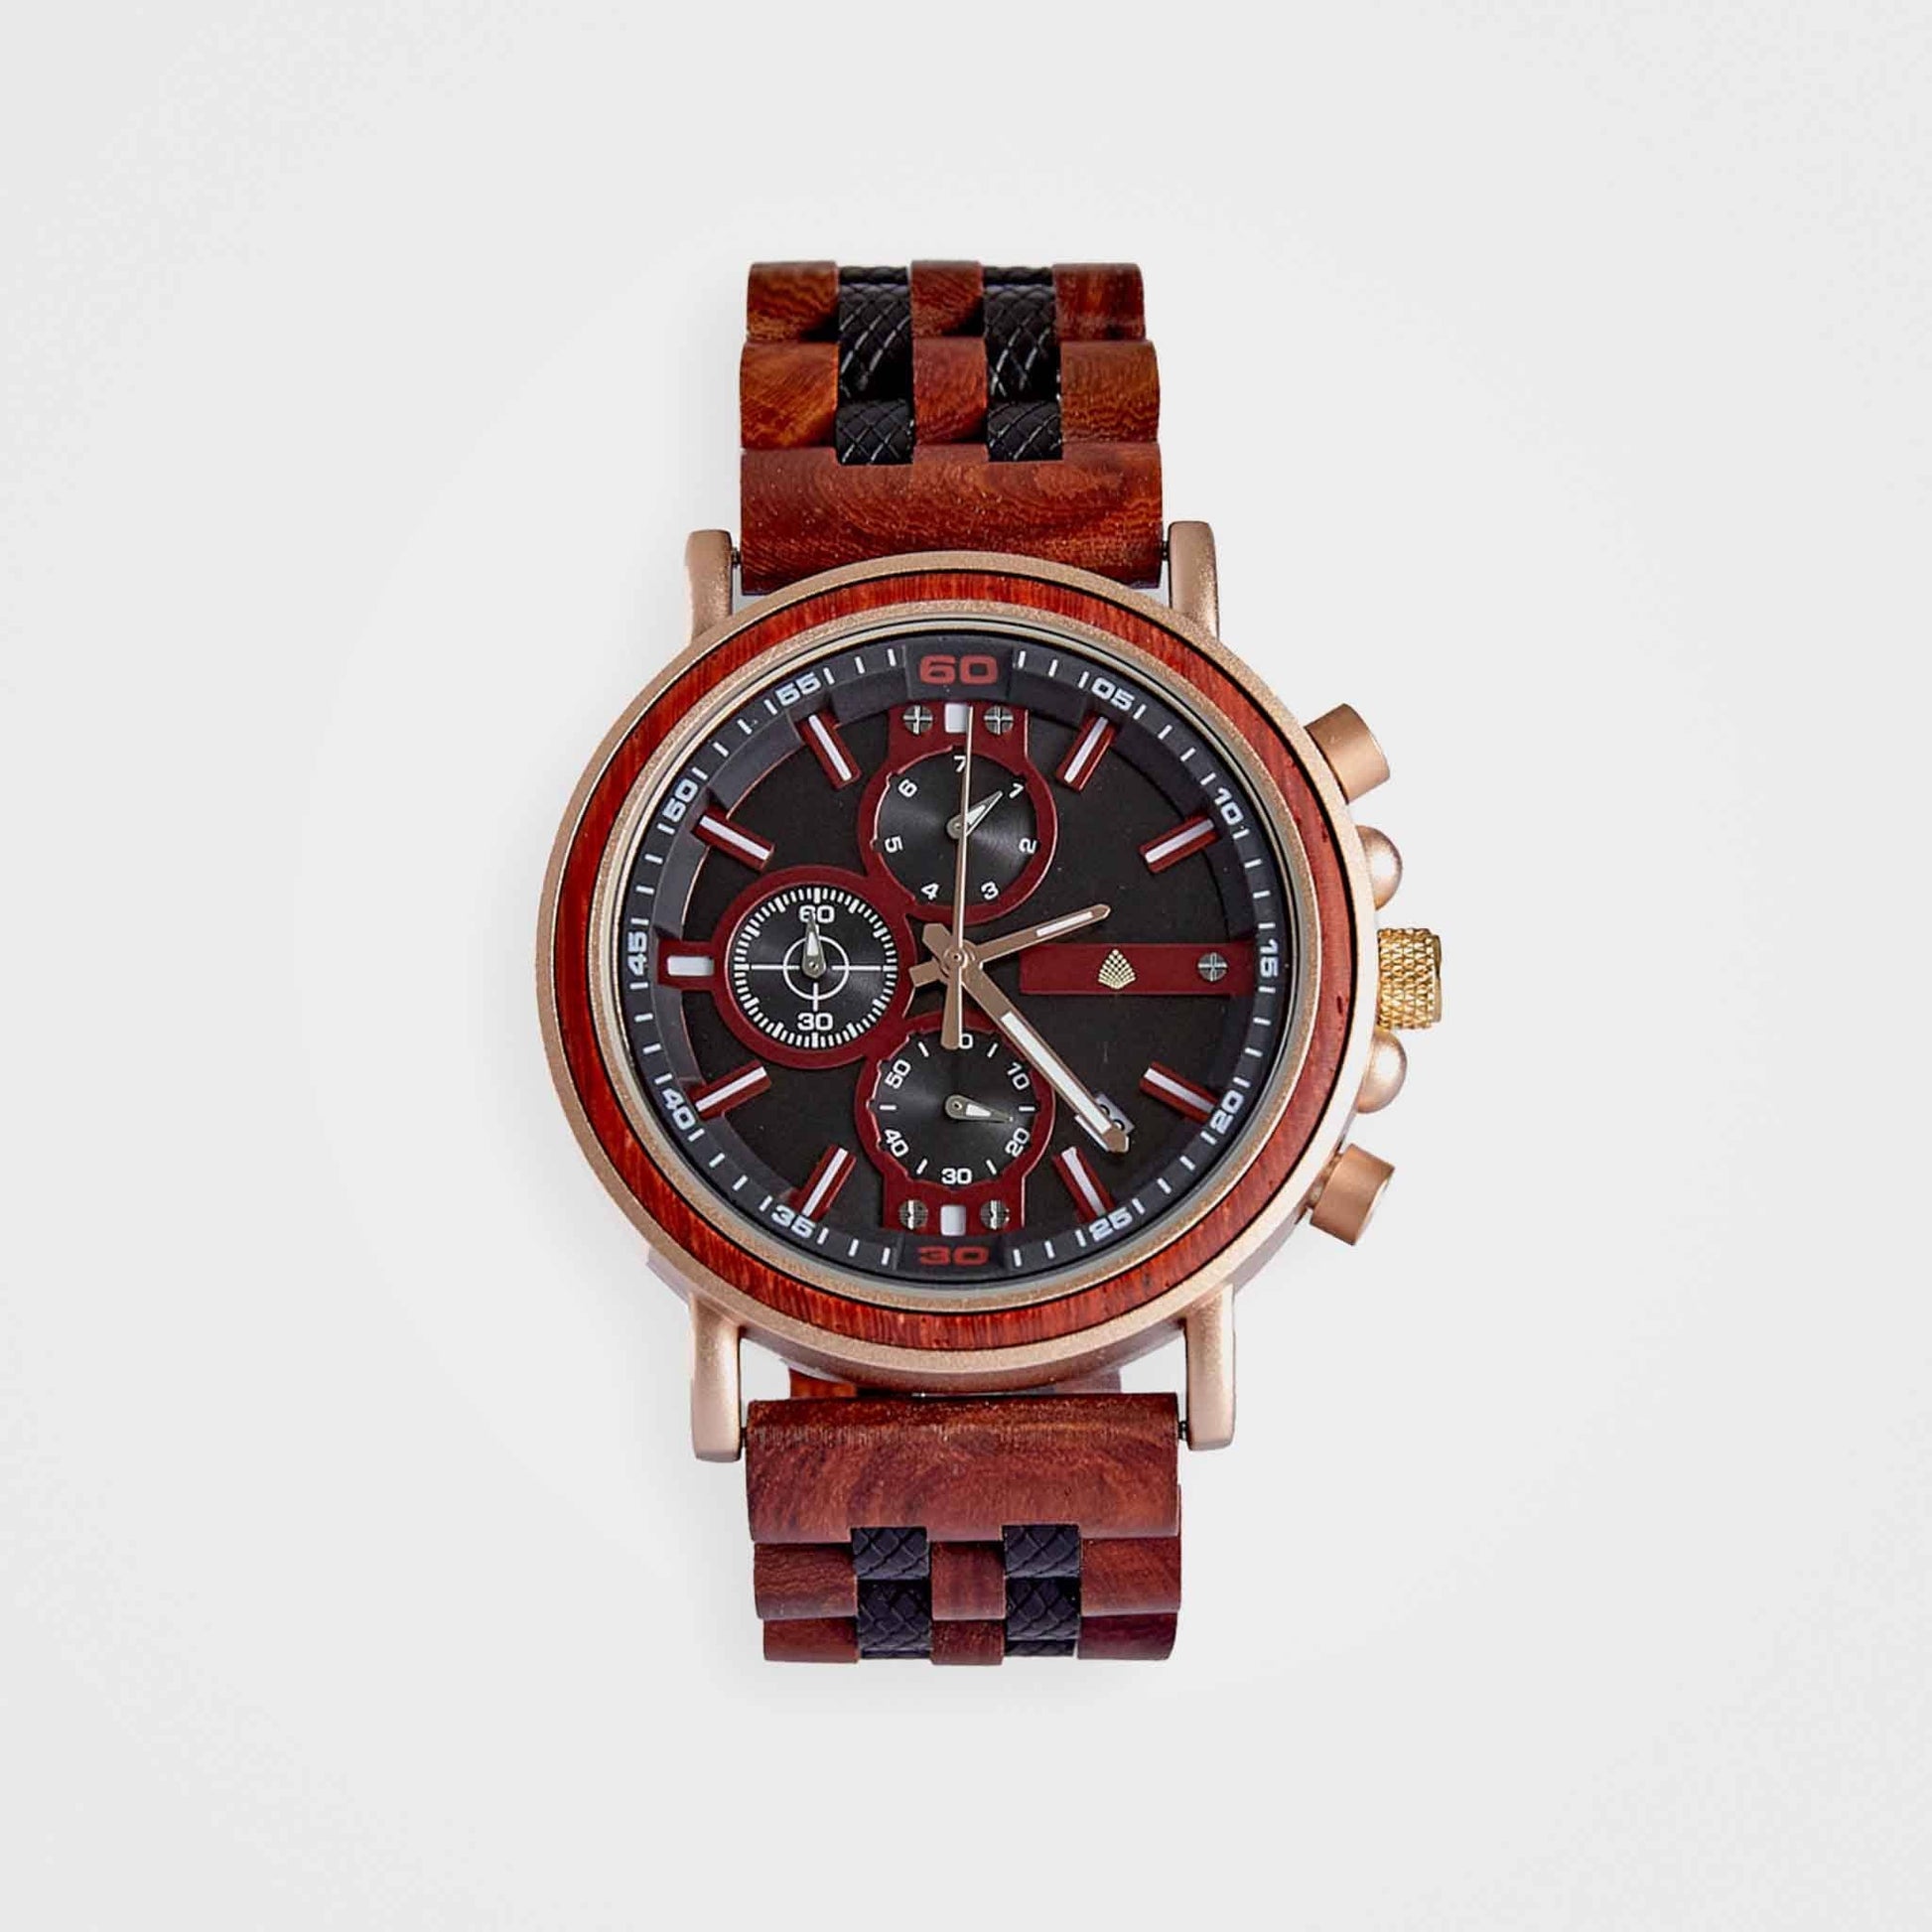 Chronograph Wooden Watch For Men: The Redwood